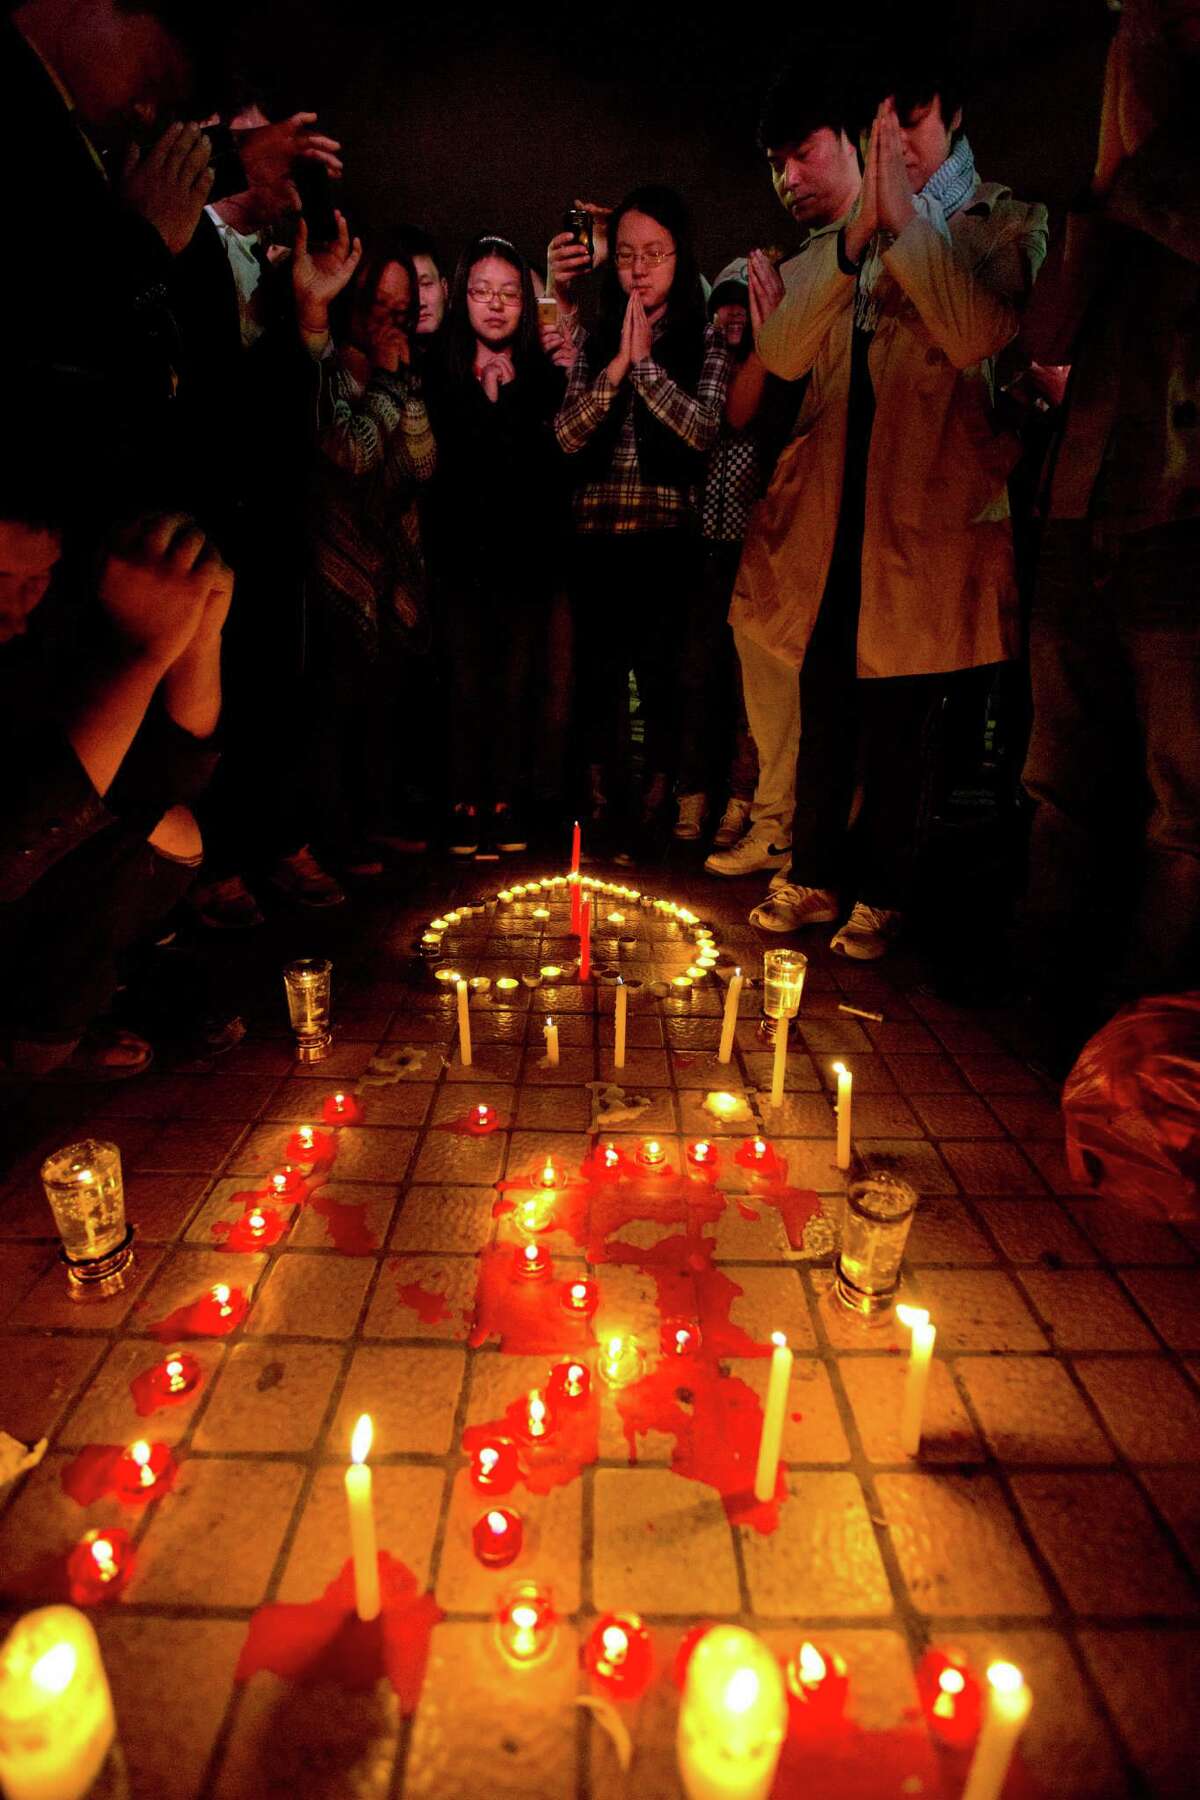 People light up candles and pray for the victims on a square outside the Kunming Railway Station where more than 10 assailants slashed scores of people with knives the night before in Kunming, in western China's Yunnan province, Sunday, March 2, 2014. Officials said the attack was a terrorist assault by ethnic separatists from the far west. (AP Photo/Alexander F. Yuan)